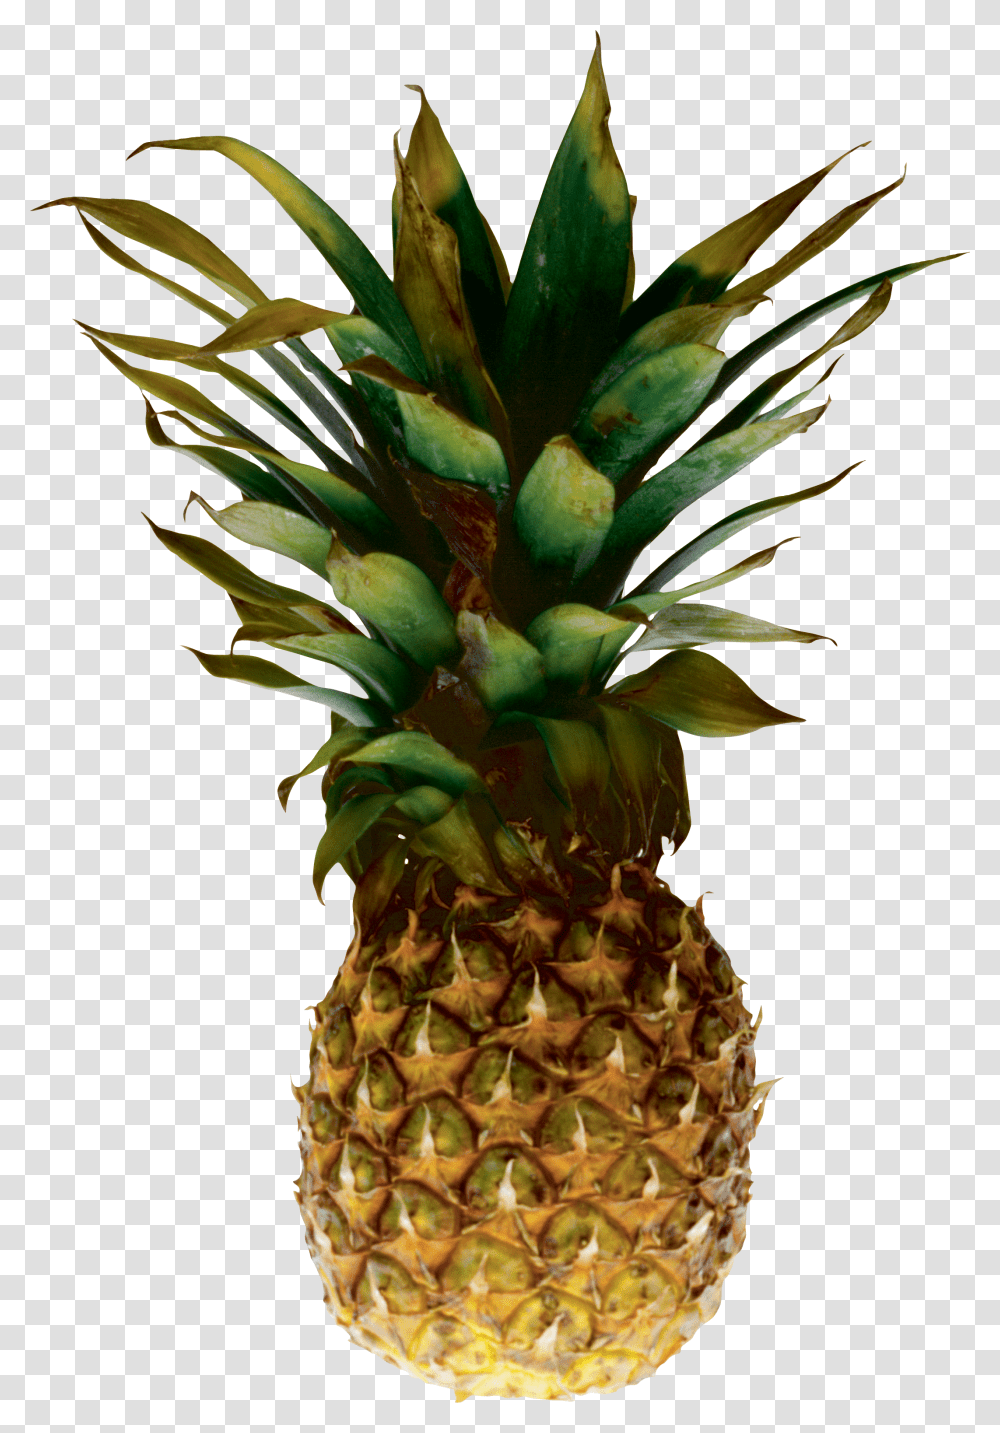 Pineapple Image Download Pineapple Background Transparent Png